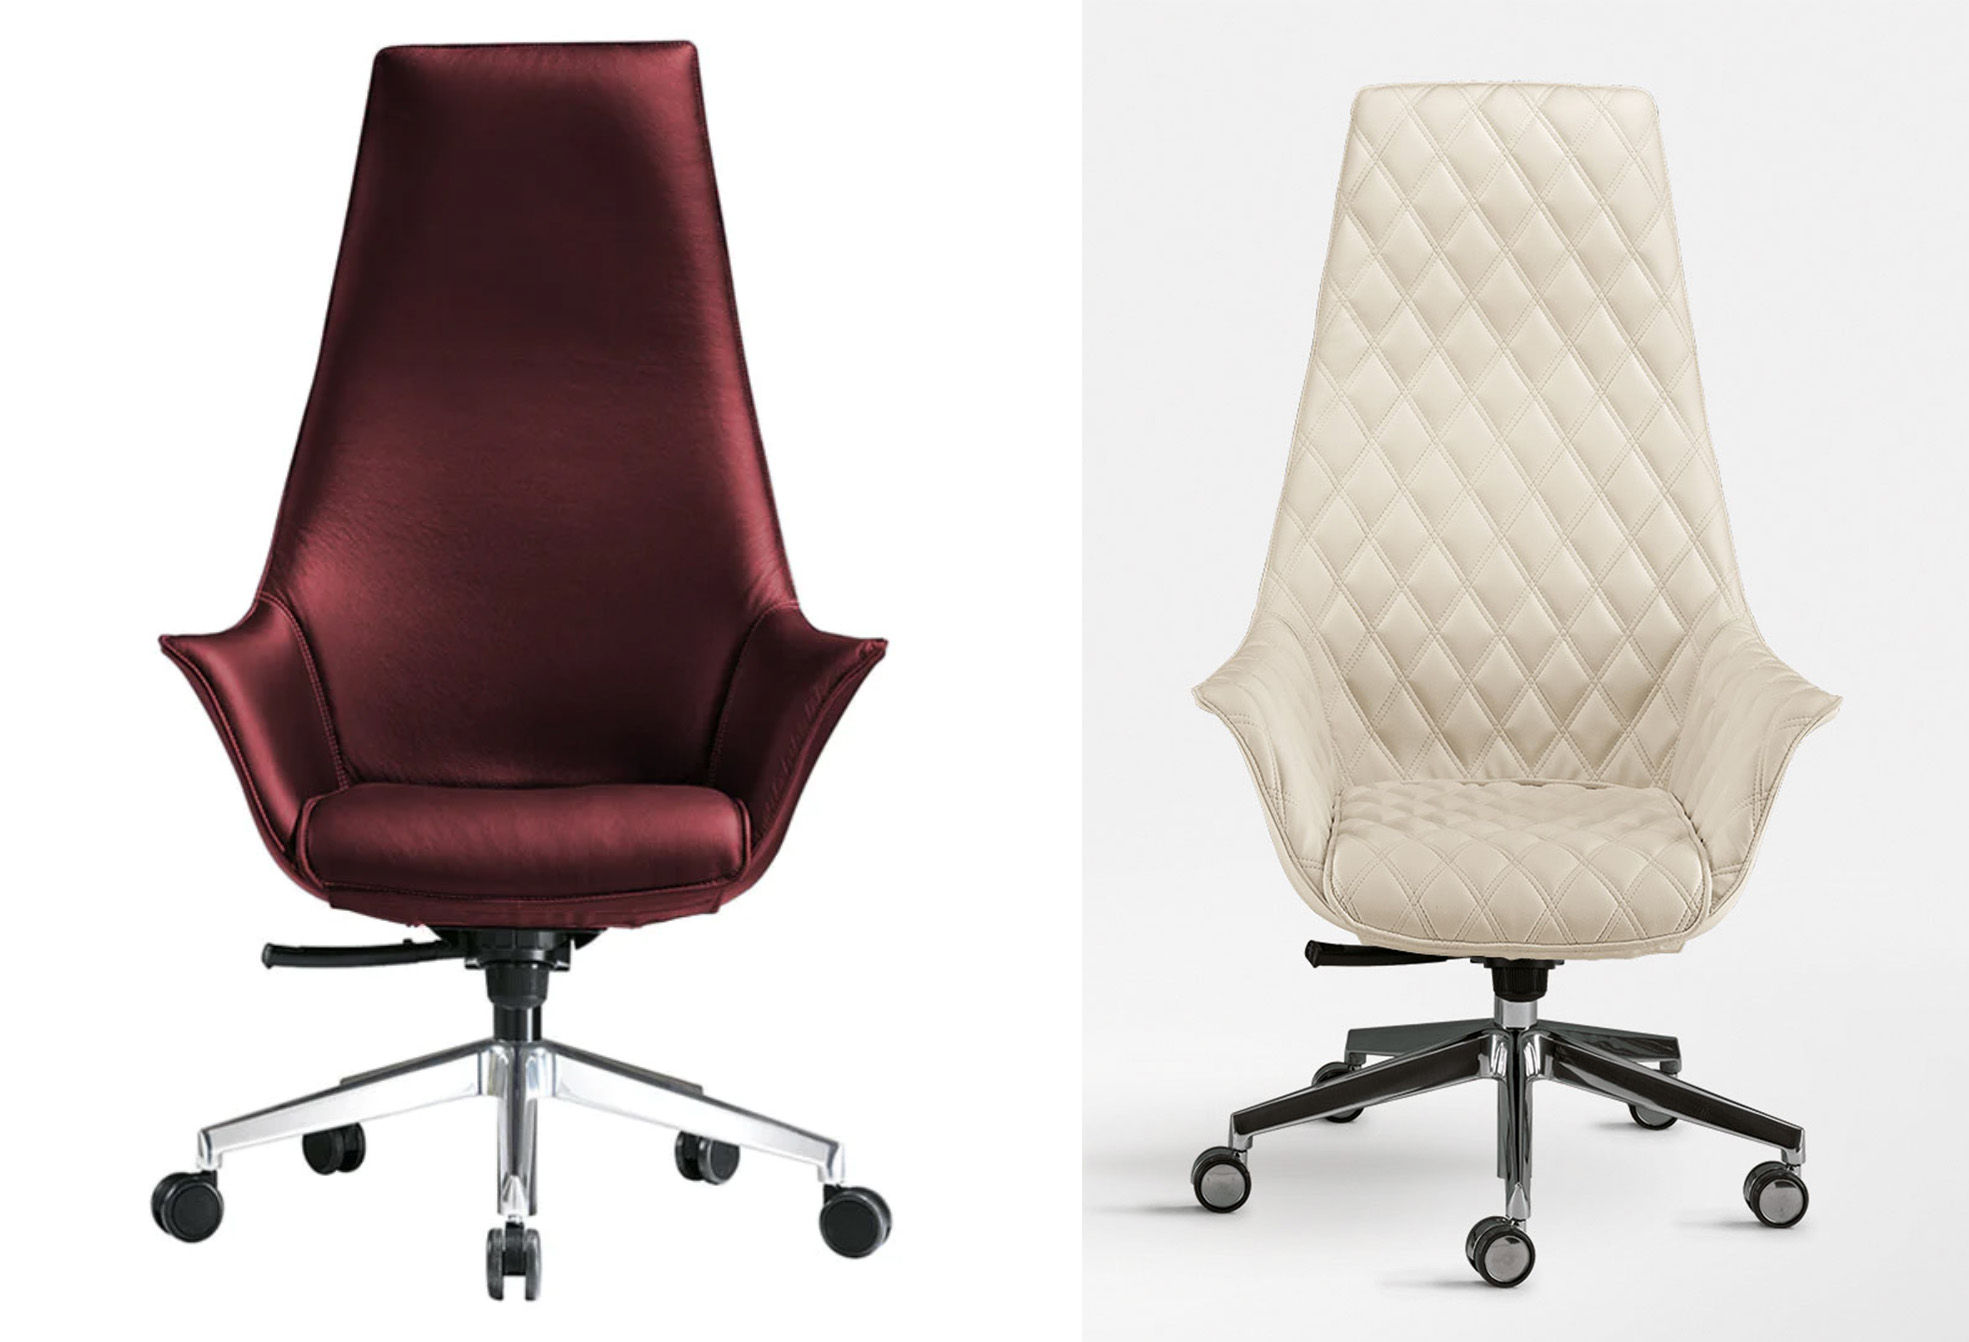 ultra Posh Diamond back executive chairs in smooth or tufted diamond back for desk and meeting applications